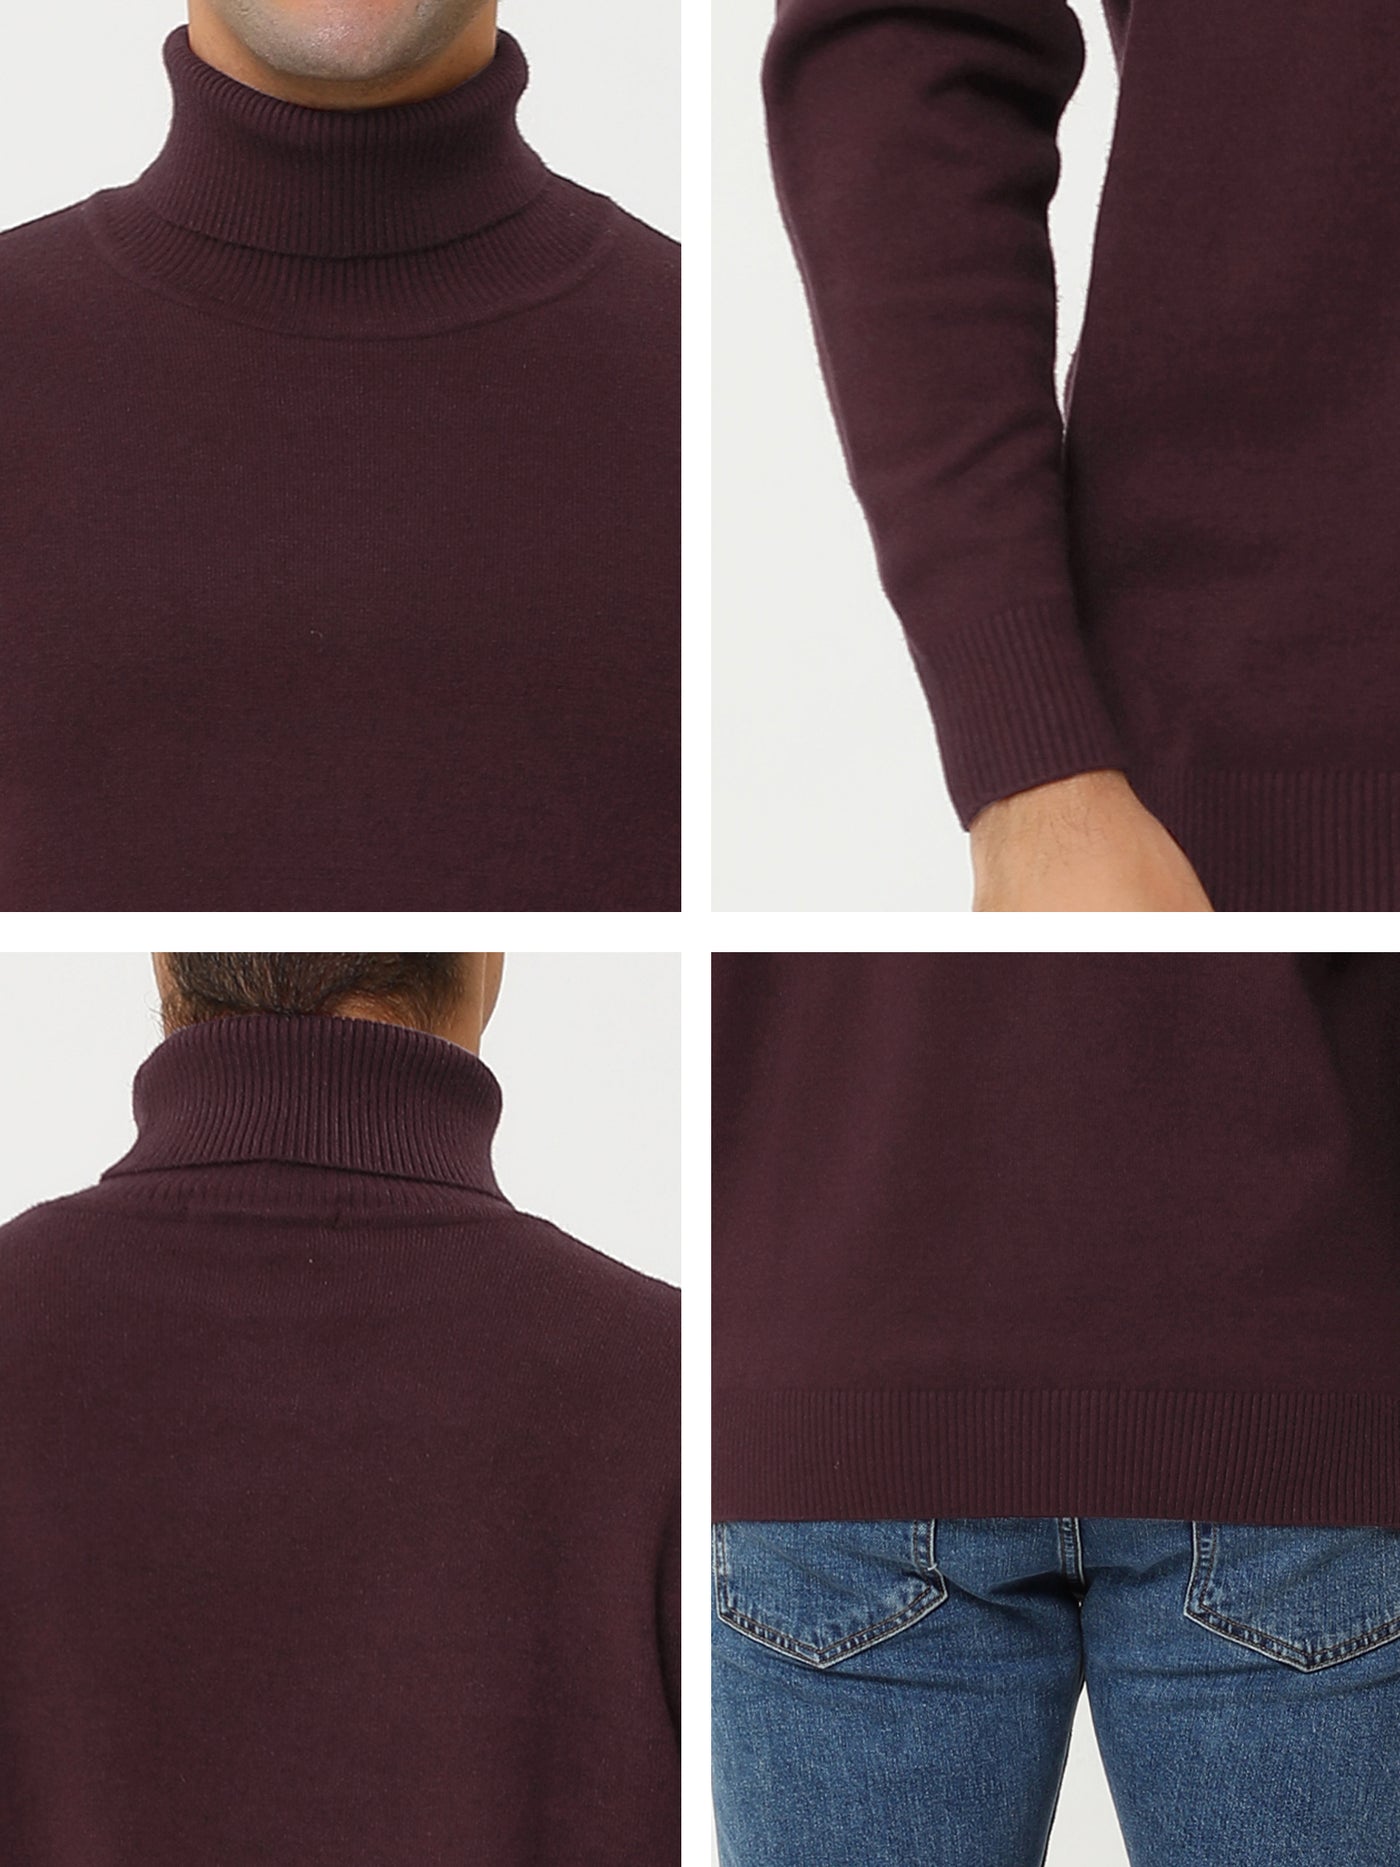 Bublédon Casual Turtleneck Long Sleeve Knit Pullover Sweater